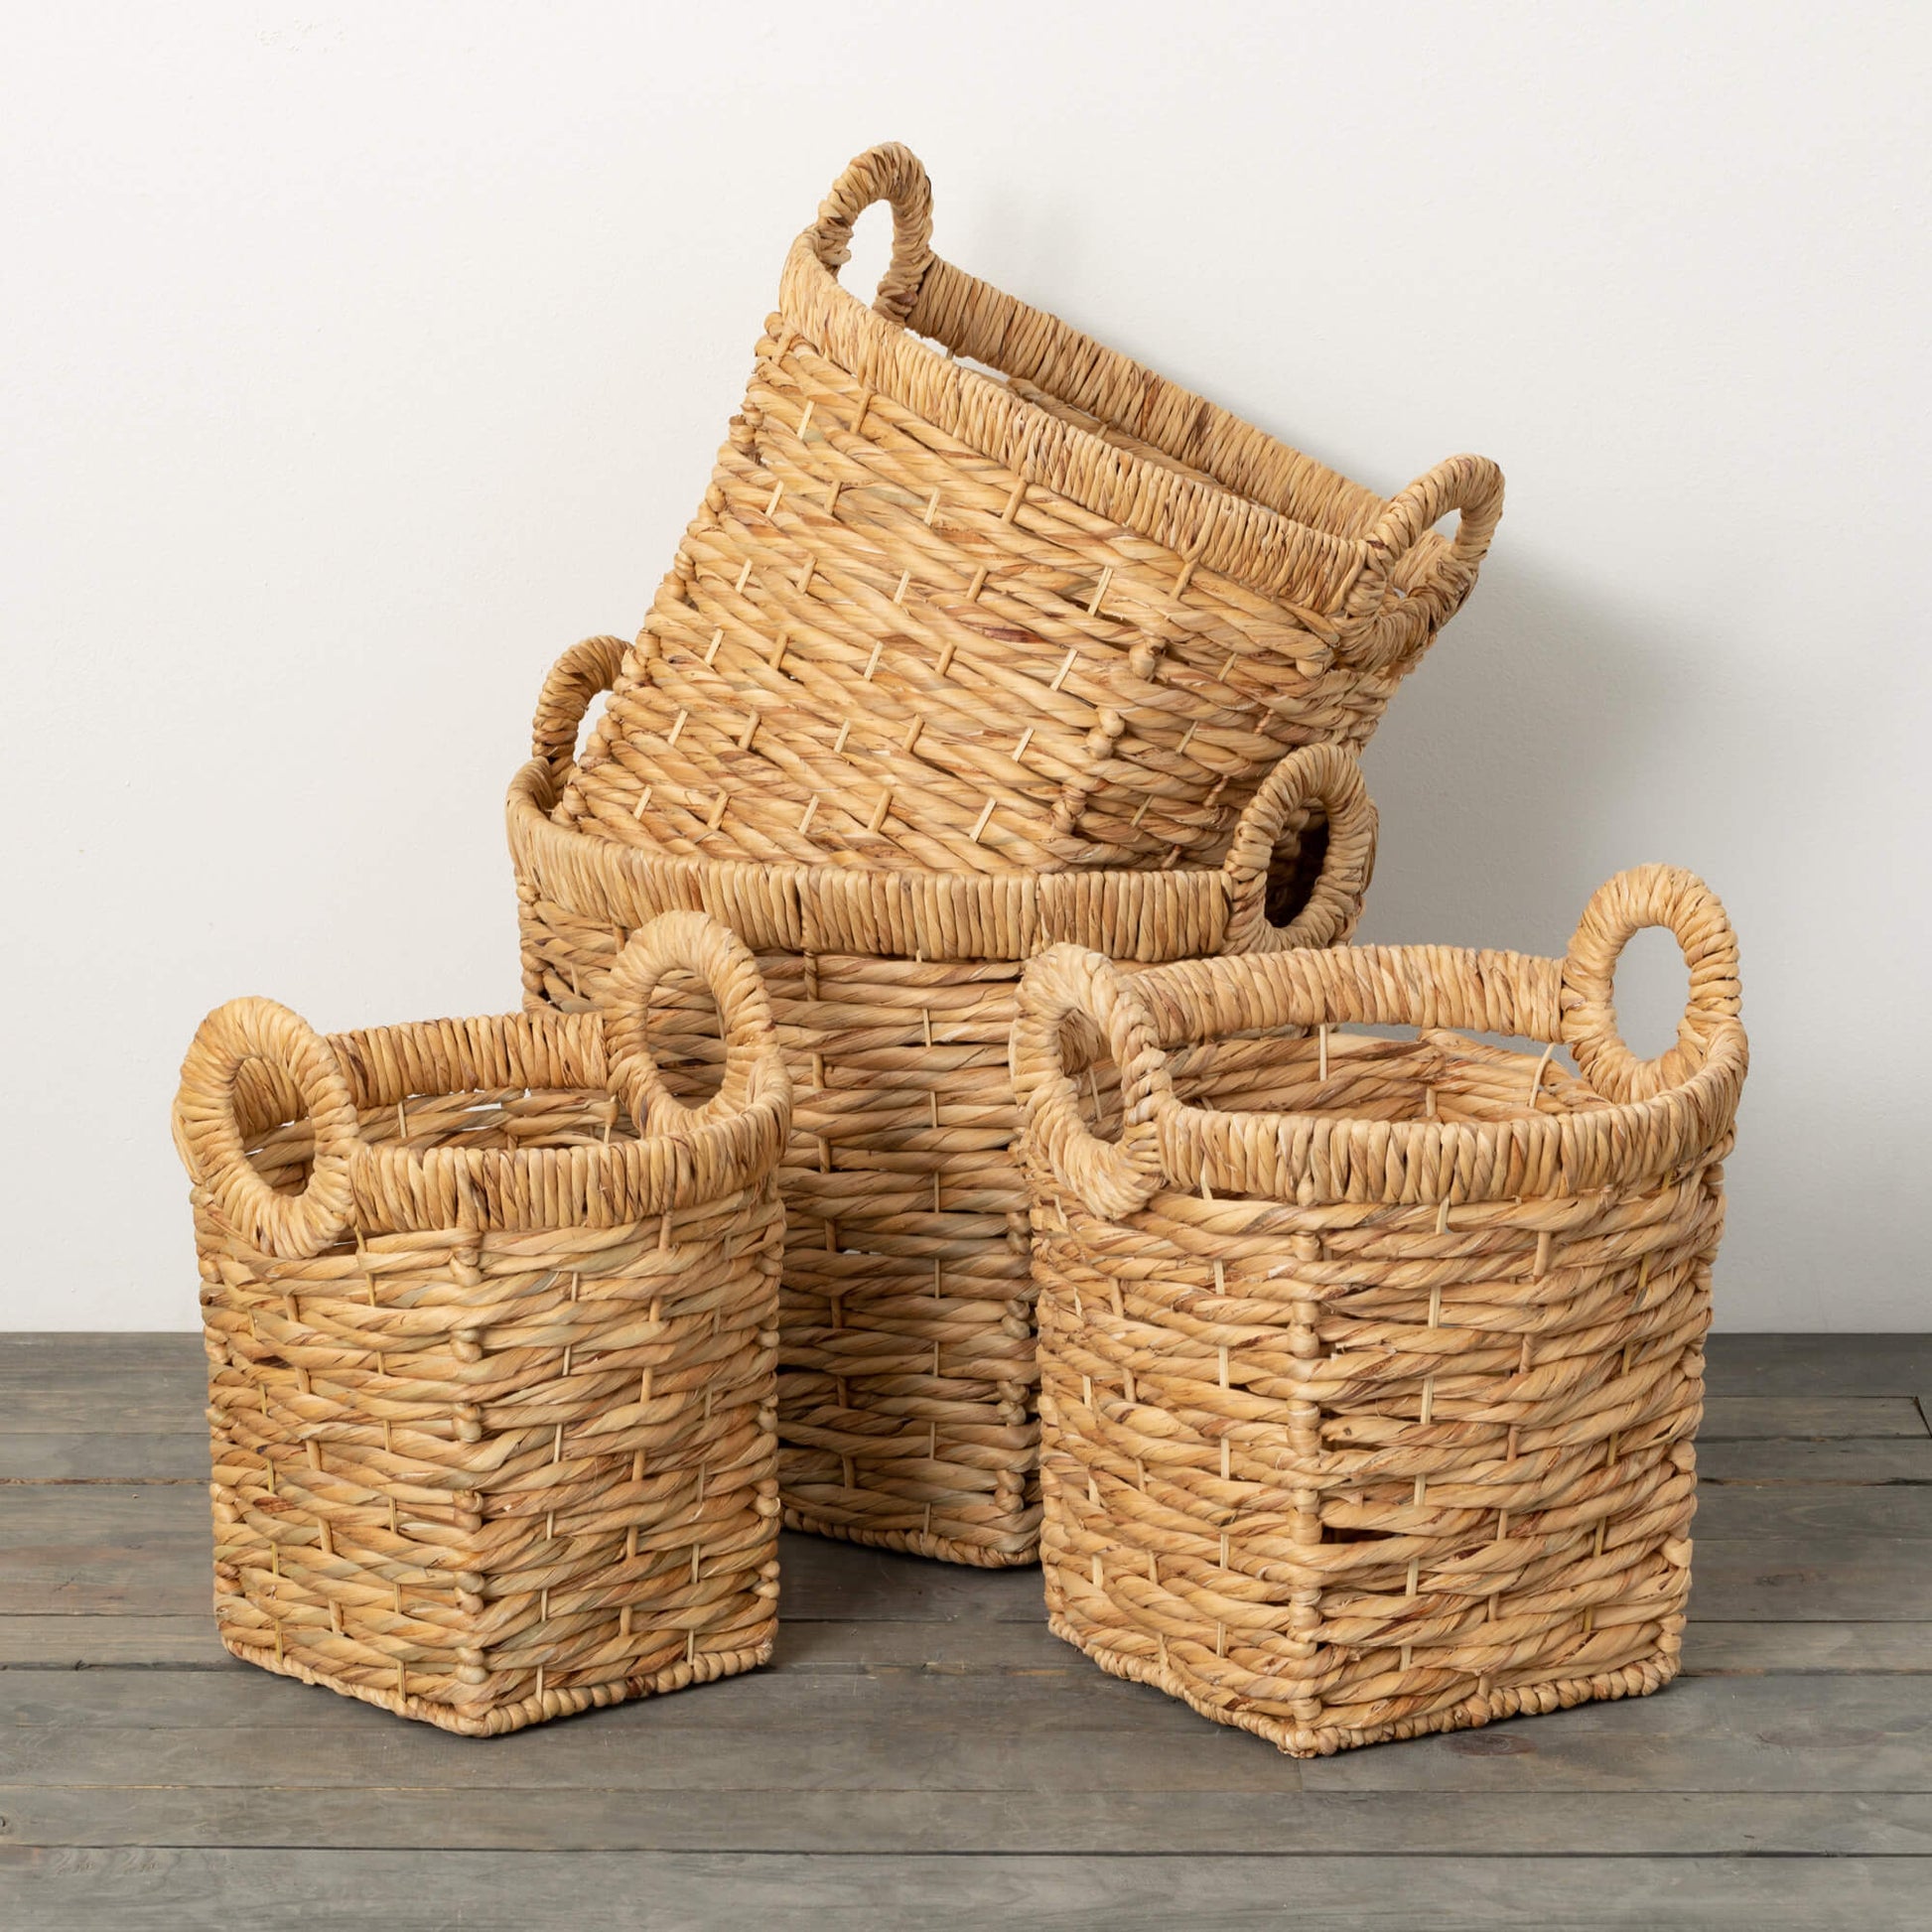 4 sizes of woven seagrass baskets with round handles arranged on a wood floor with white wall in background.